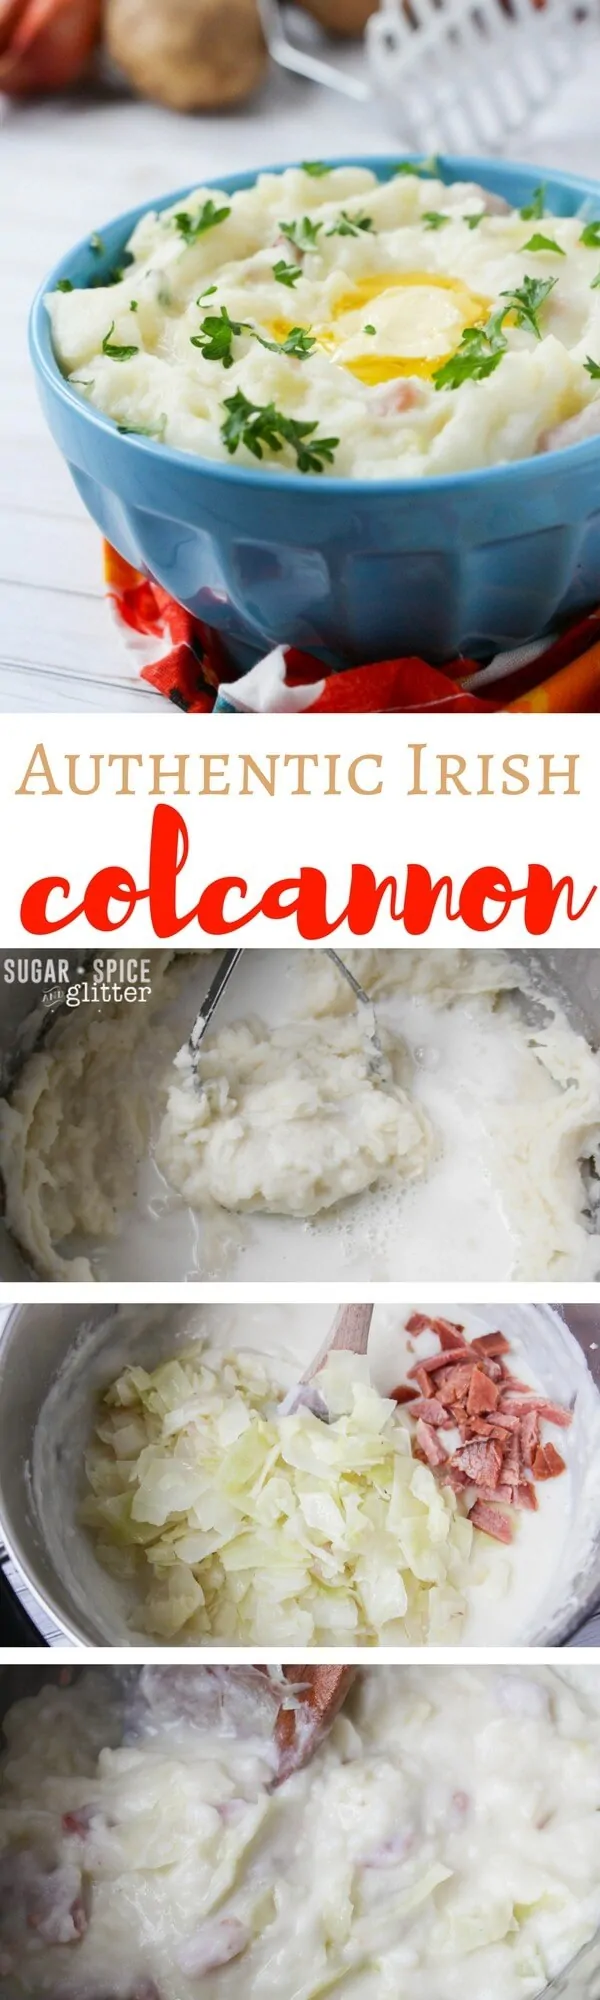 An easy and authentic recipe for Irish Colcannon - the creamiest and butteriest mashed potatoes, loaded with delicious mix-ins